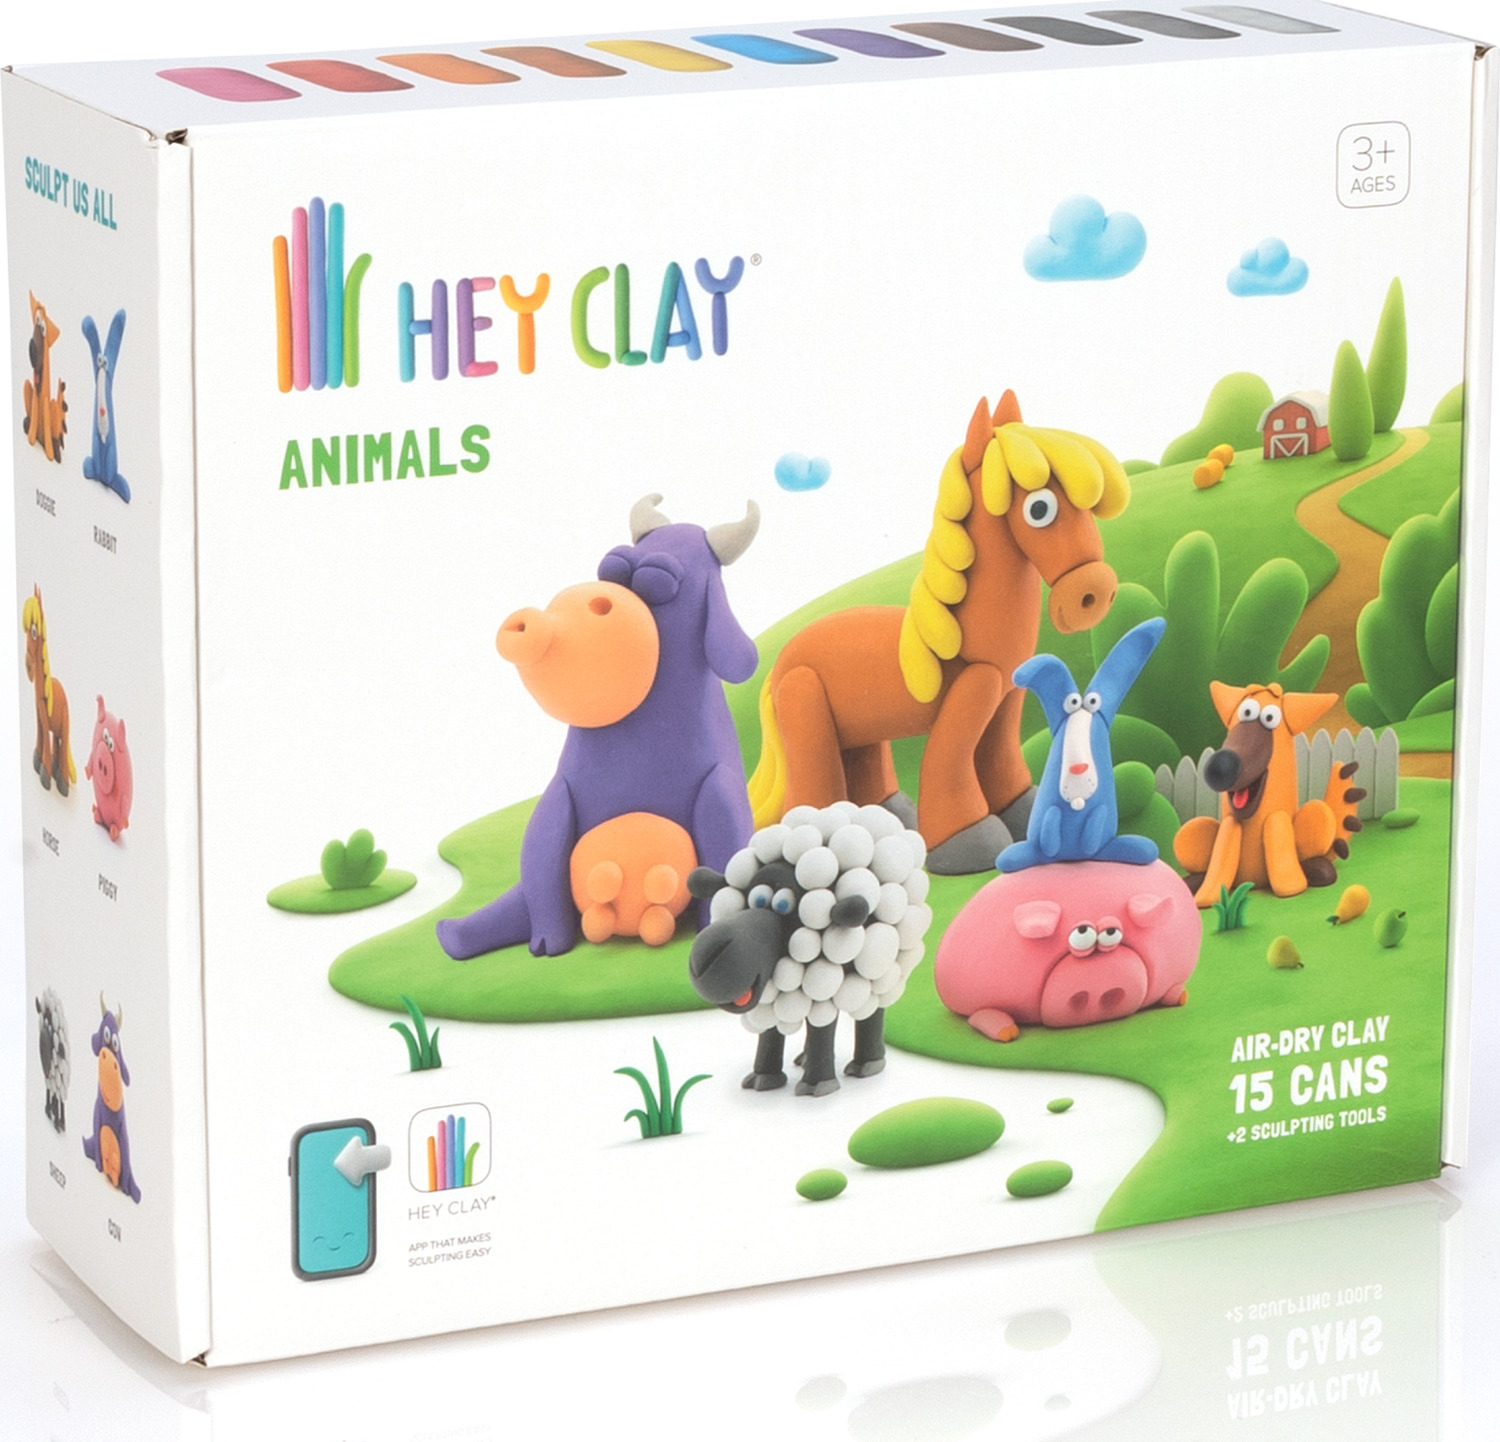 Hey Clay - Animals - 15 Can Modeling Air-Dry Clay - Imagination Toys